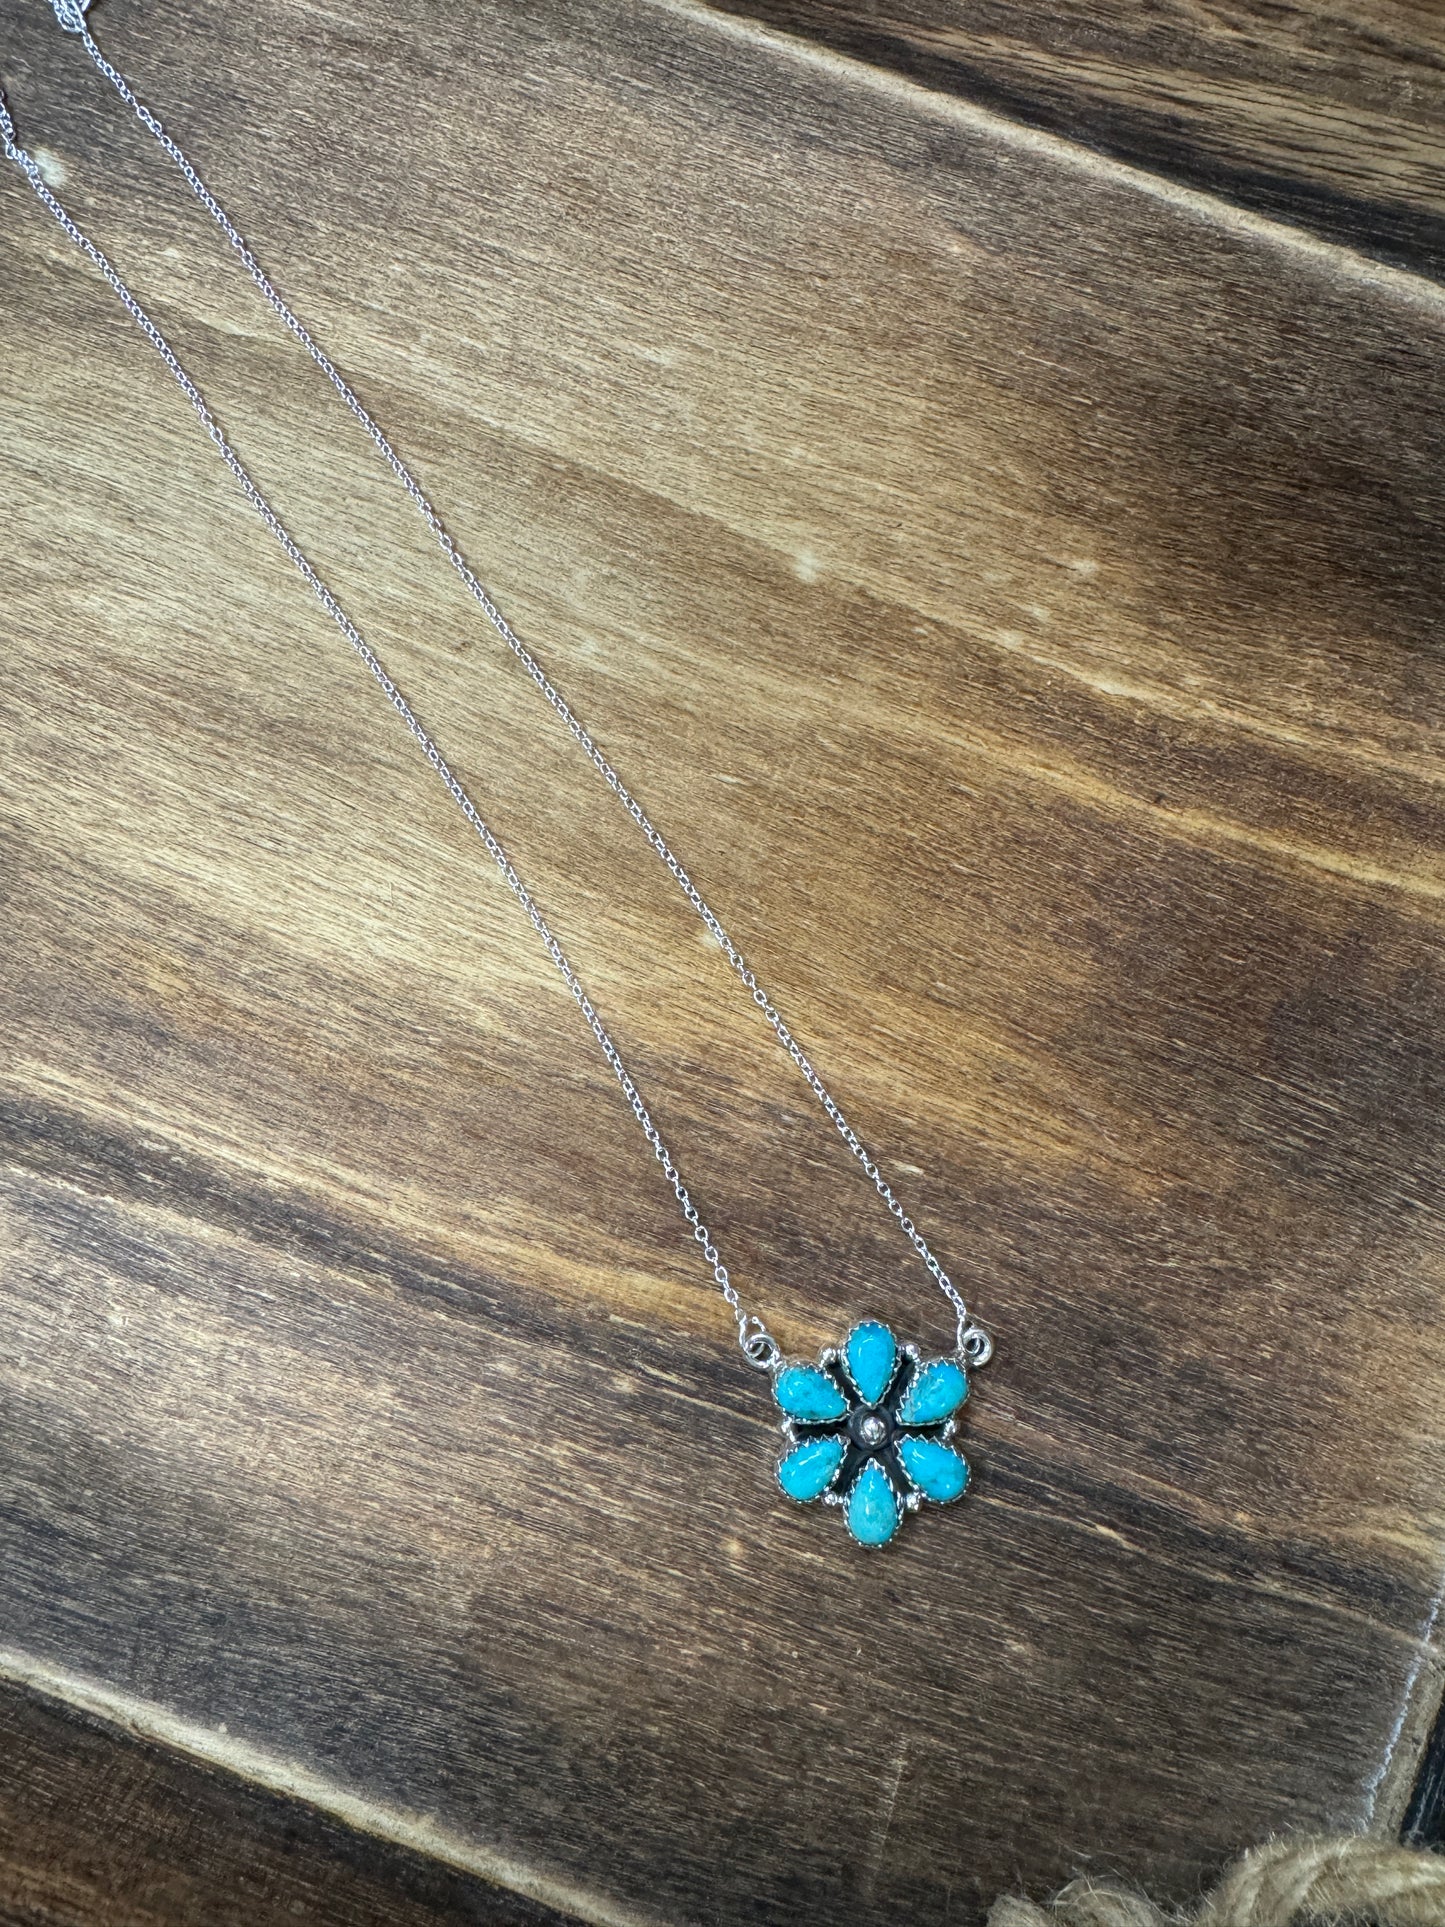 18” Kingman Turquoise cluster on silver chain